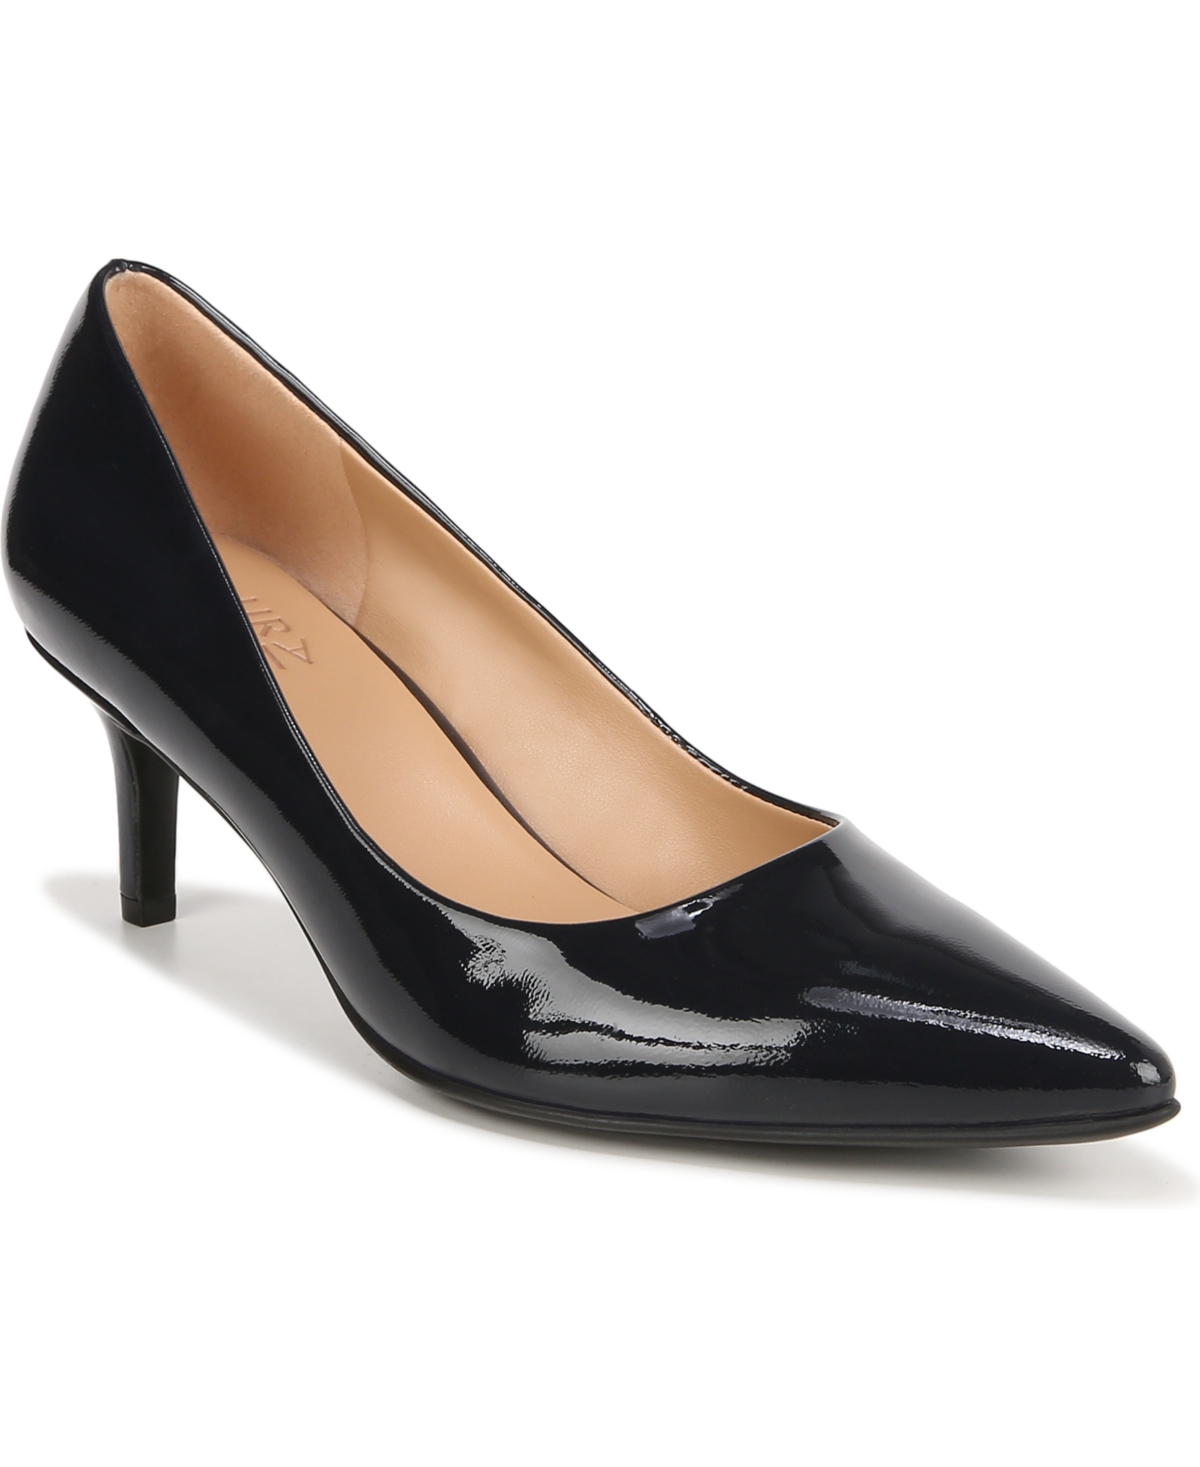 Everly Pumps - Black Leather